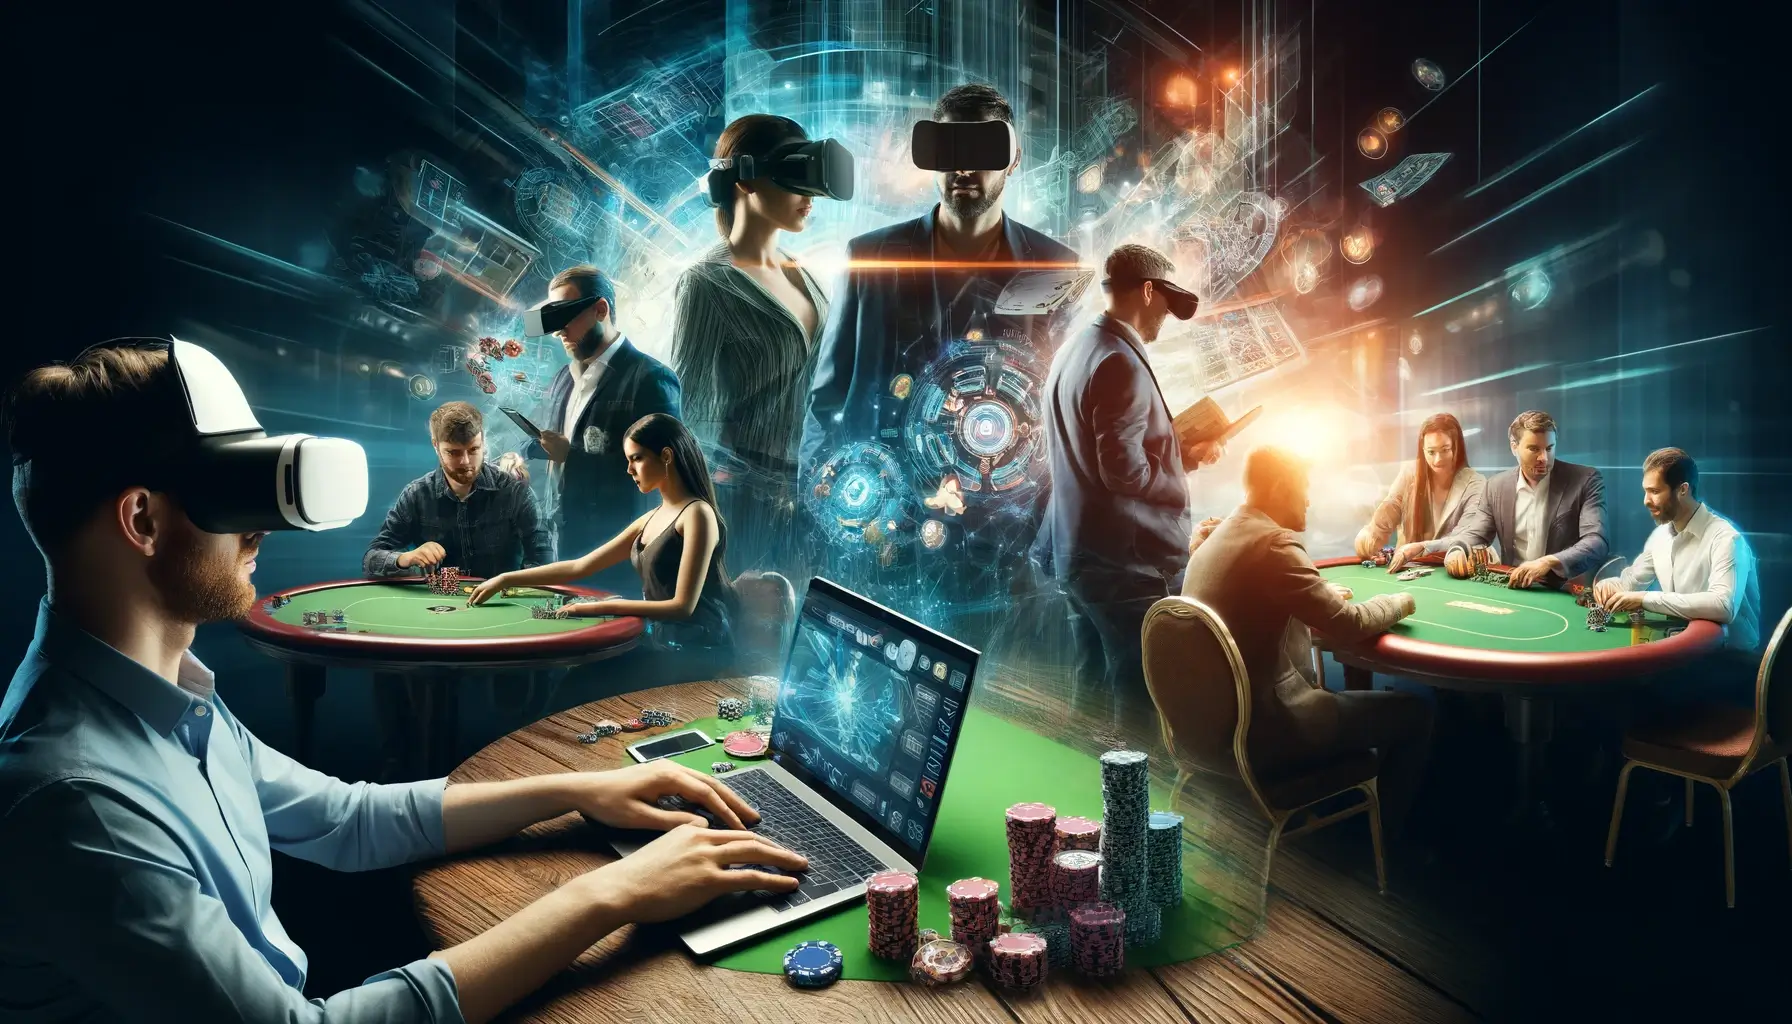 A dynamic image showcasing the digital transformation of poker, featuring players using various devices, virtual reality headsets, and traditional poker tables, set against a futuristic virtual casino background.